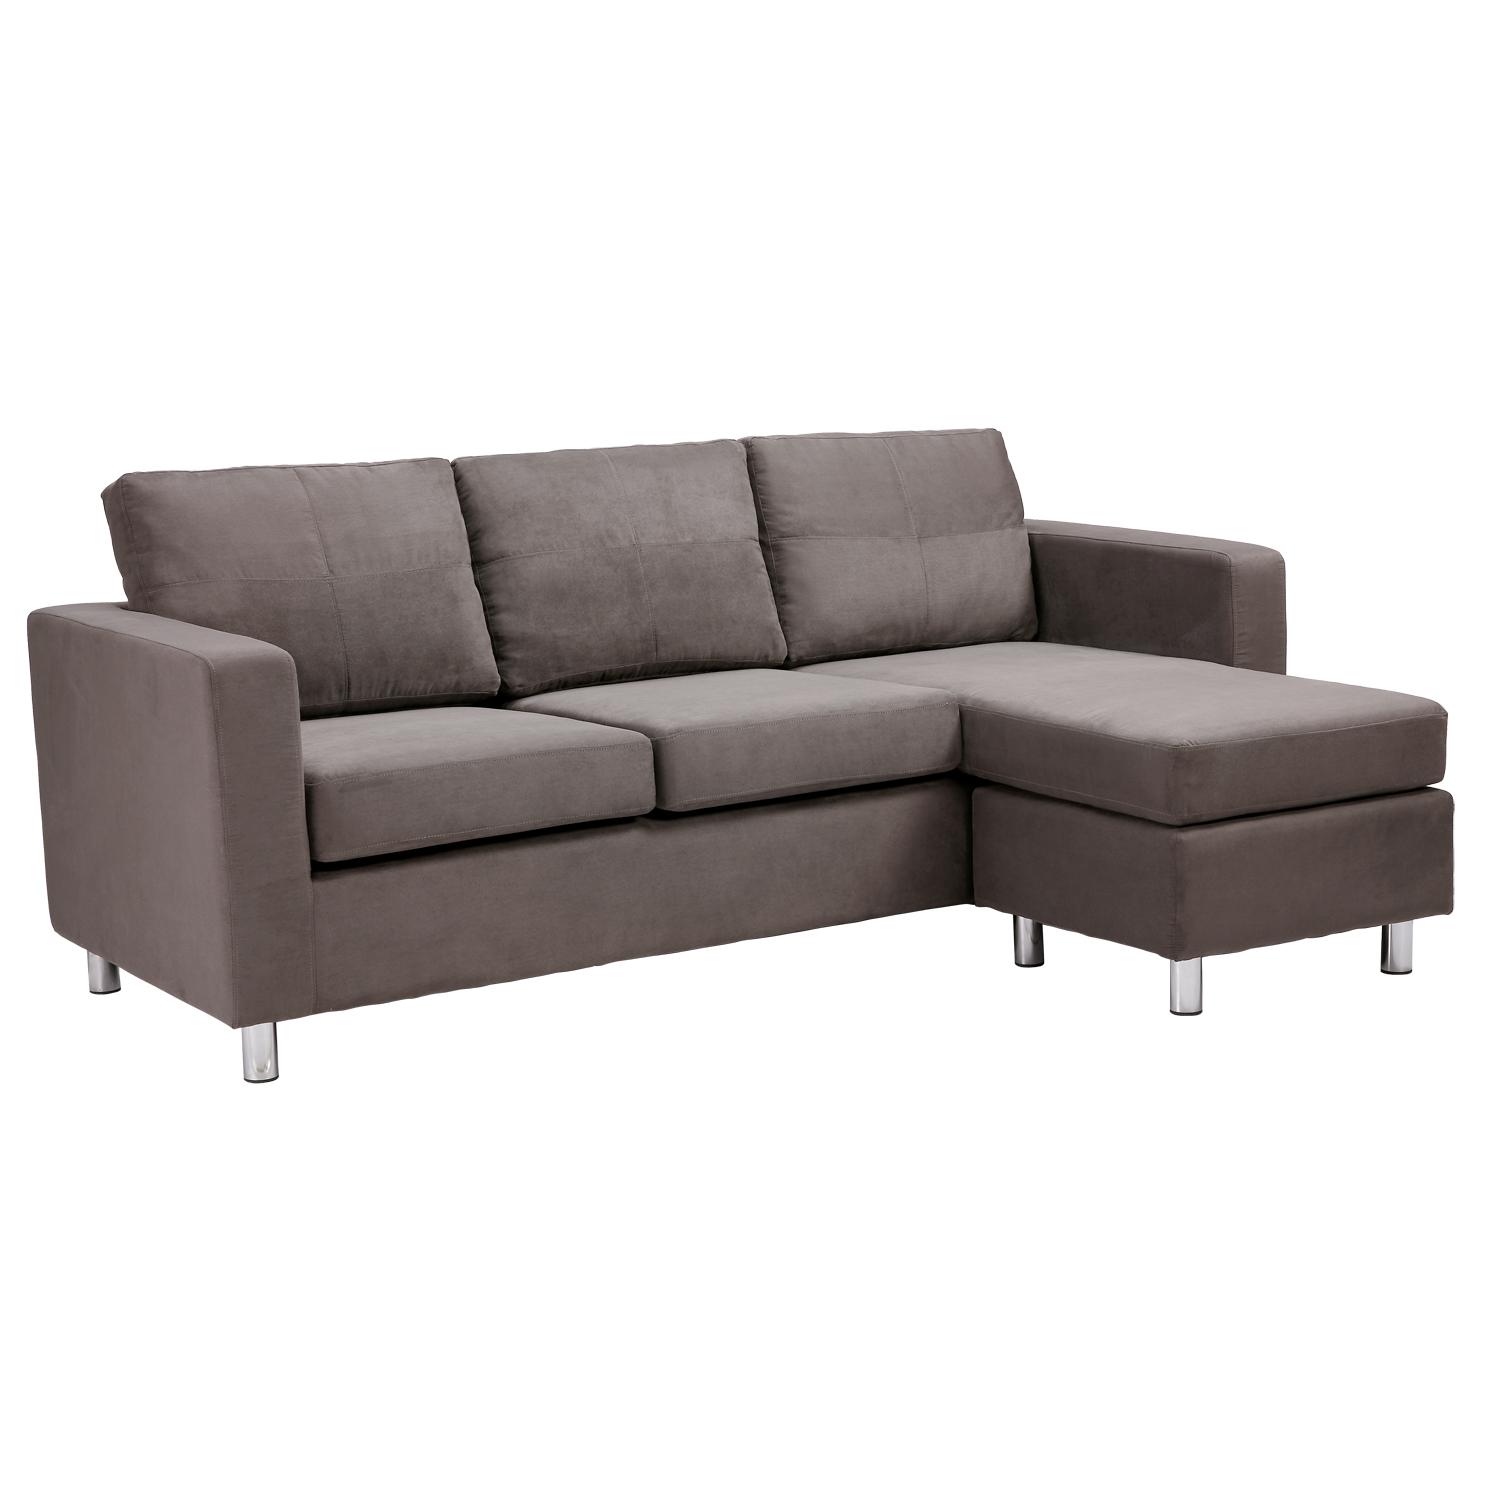 Awesome Modern Minimalist Design Small Sectional Sofa In Gray Color Viahouse Com